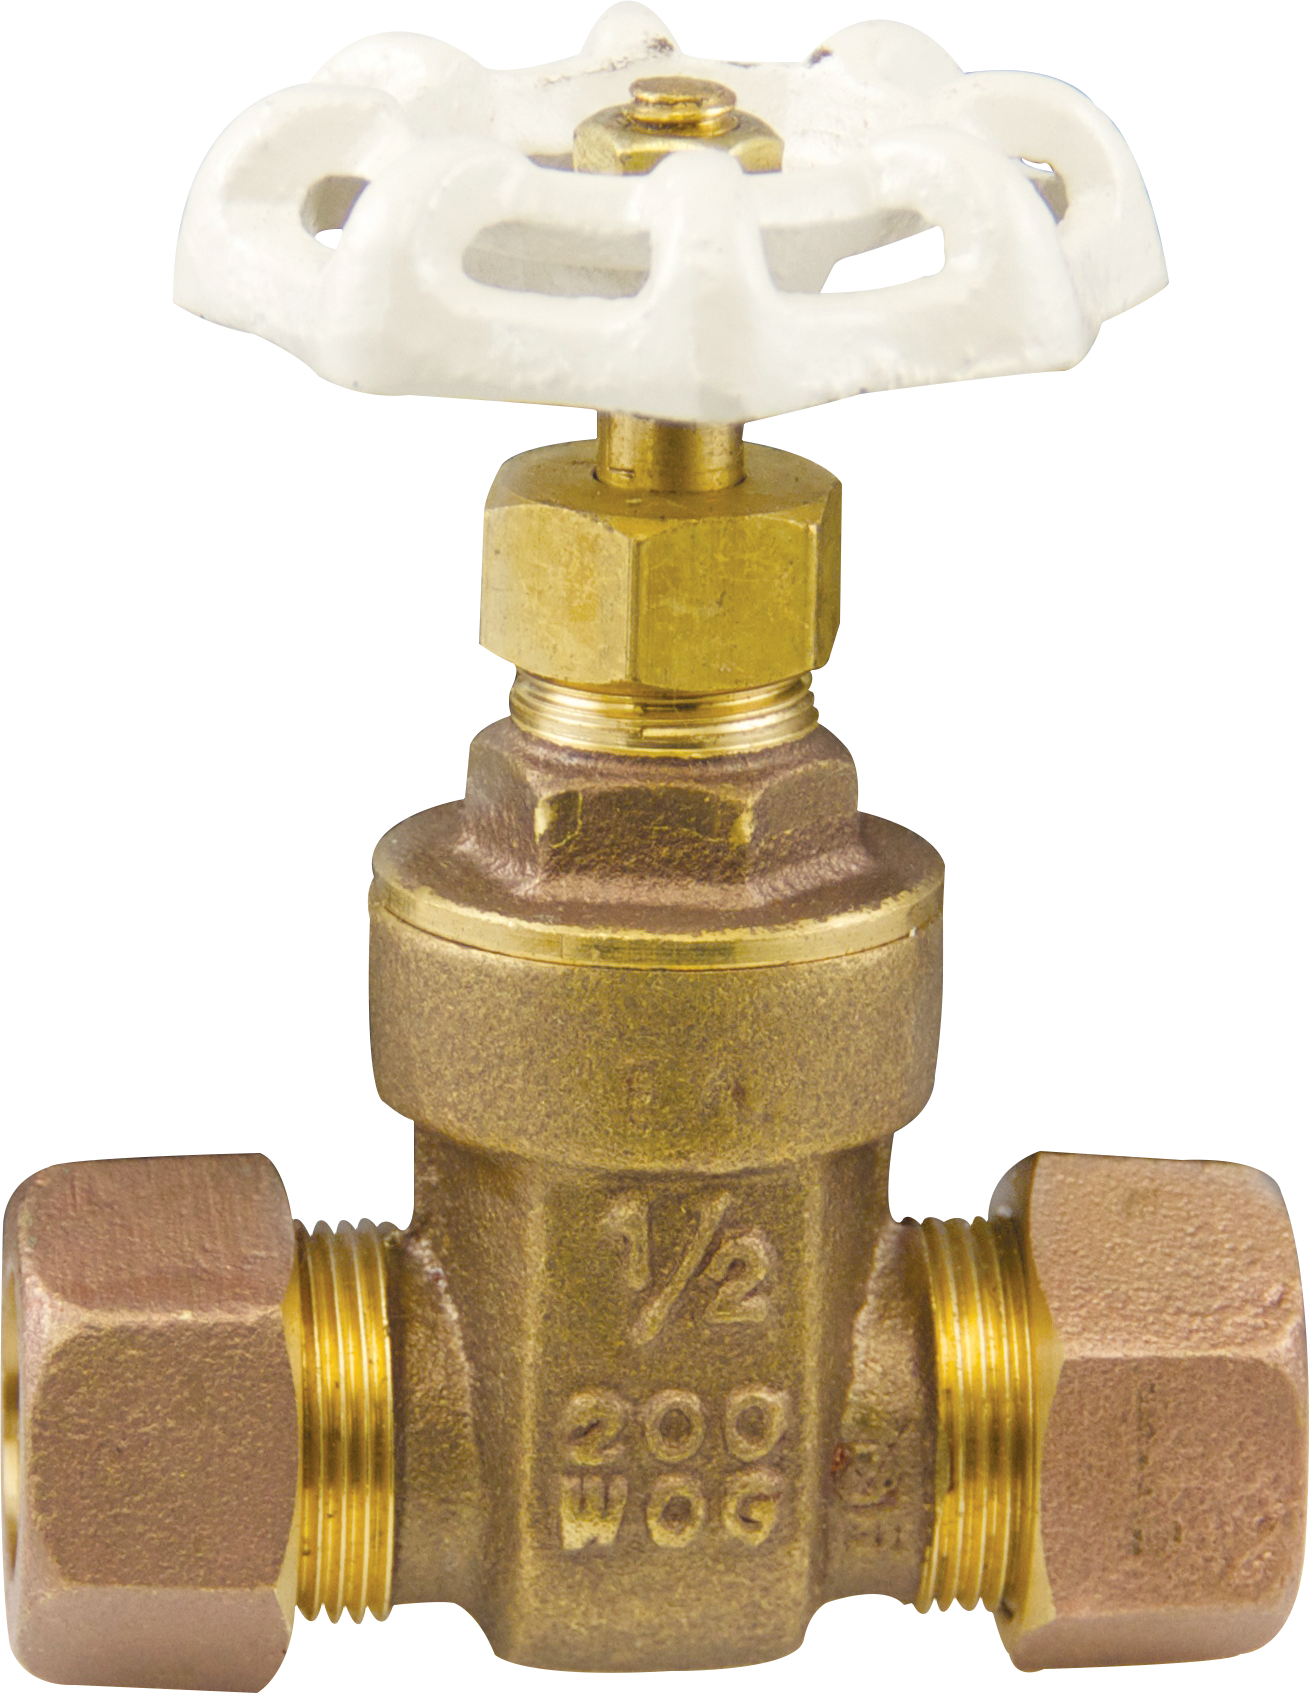 Copper Compression Coupling - 2 - - Backflow Parts USA